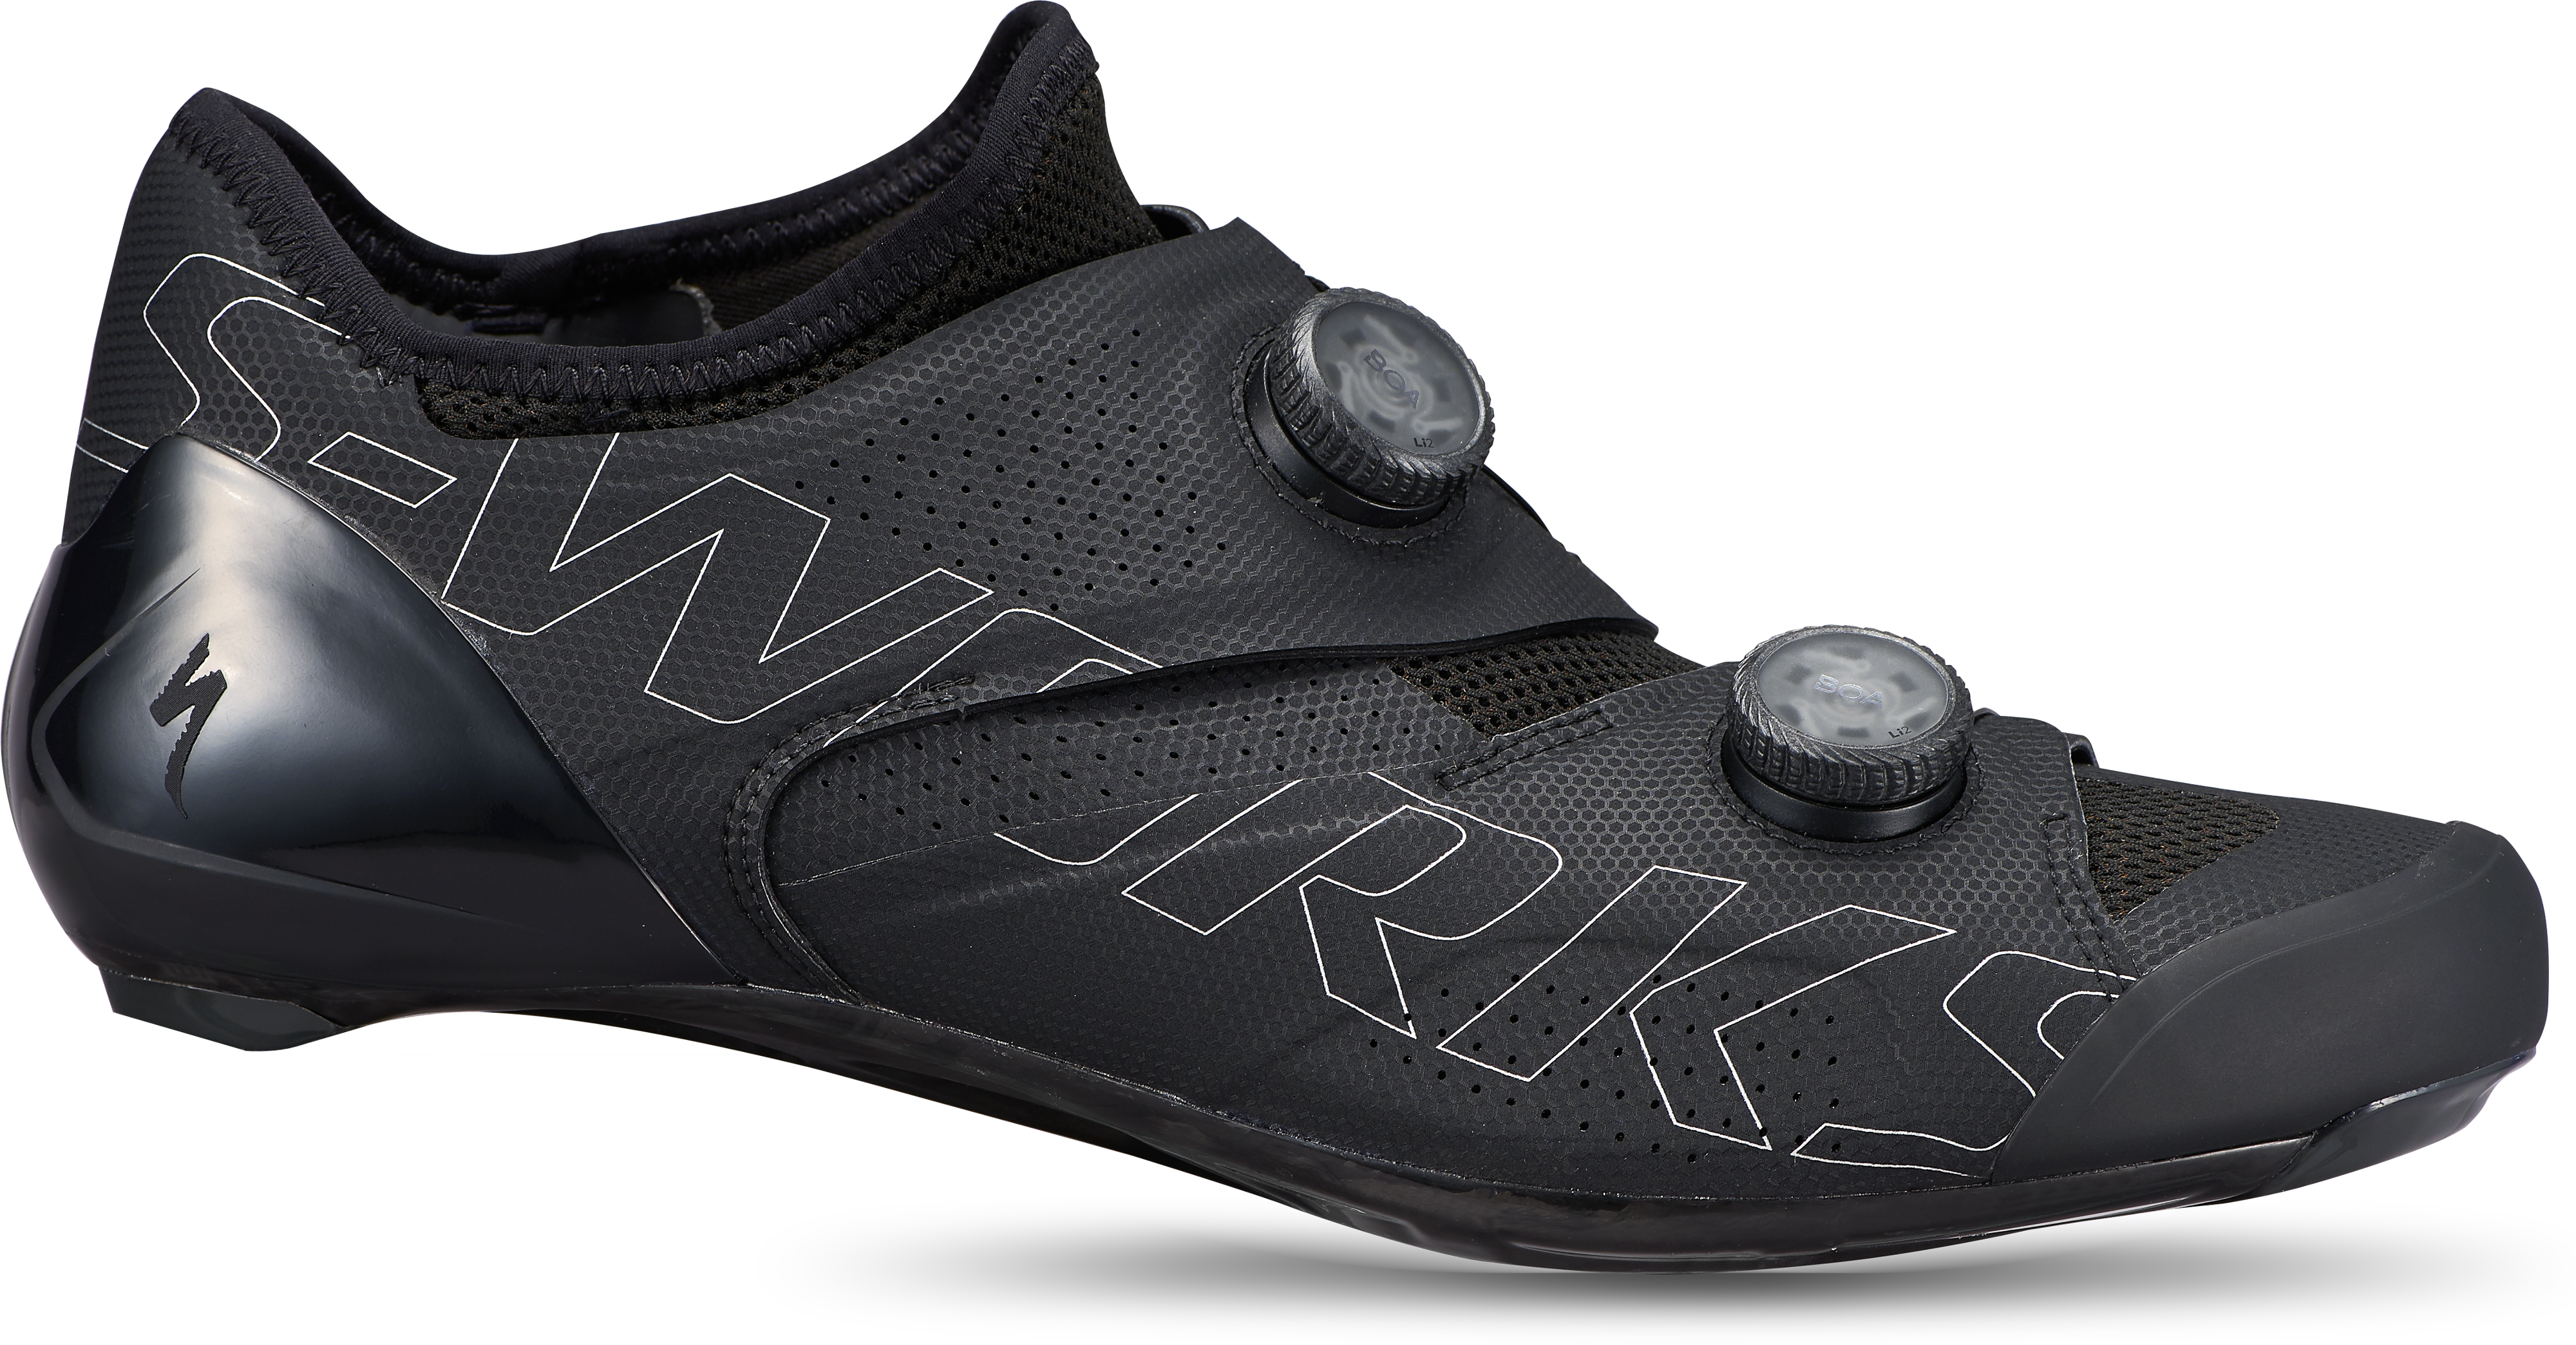 S-WORKS ARES ROAD SHOES BLK 39(39 (25cm) ブラック): シューズ 